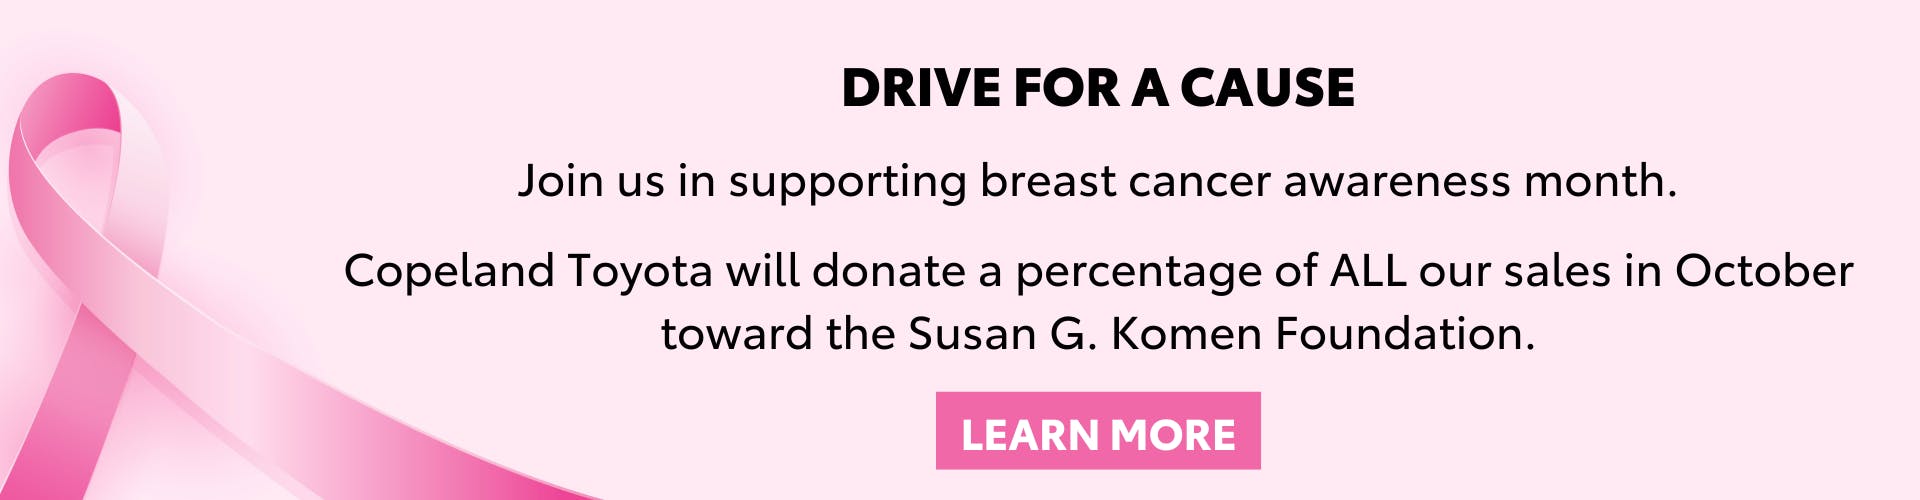 Drive for a Cause